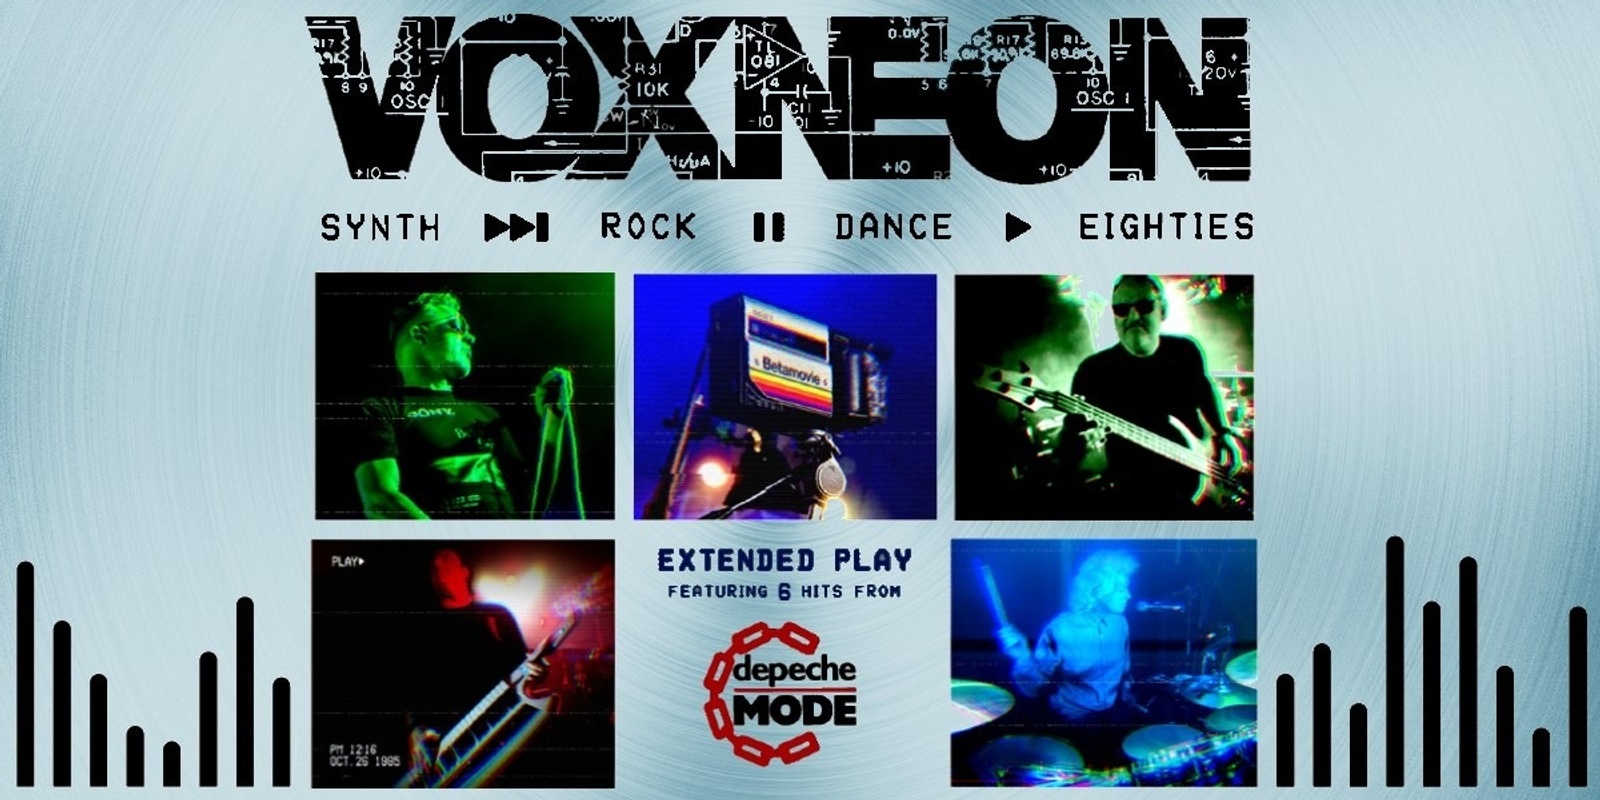 Banner image for VOXNEON - Extended Play